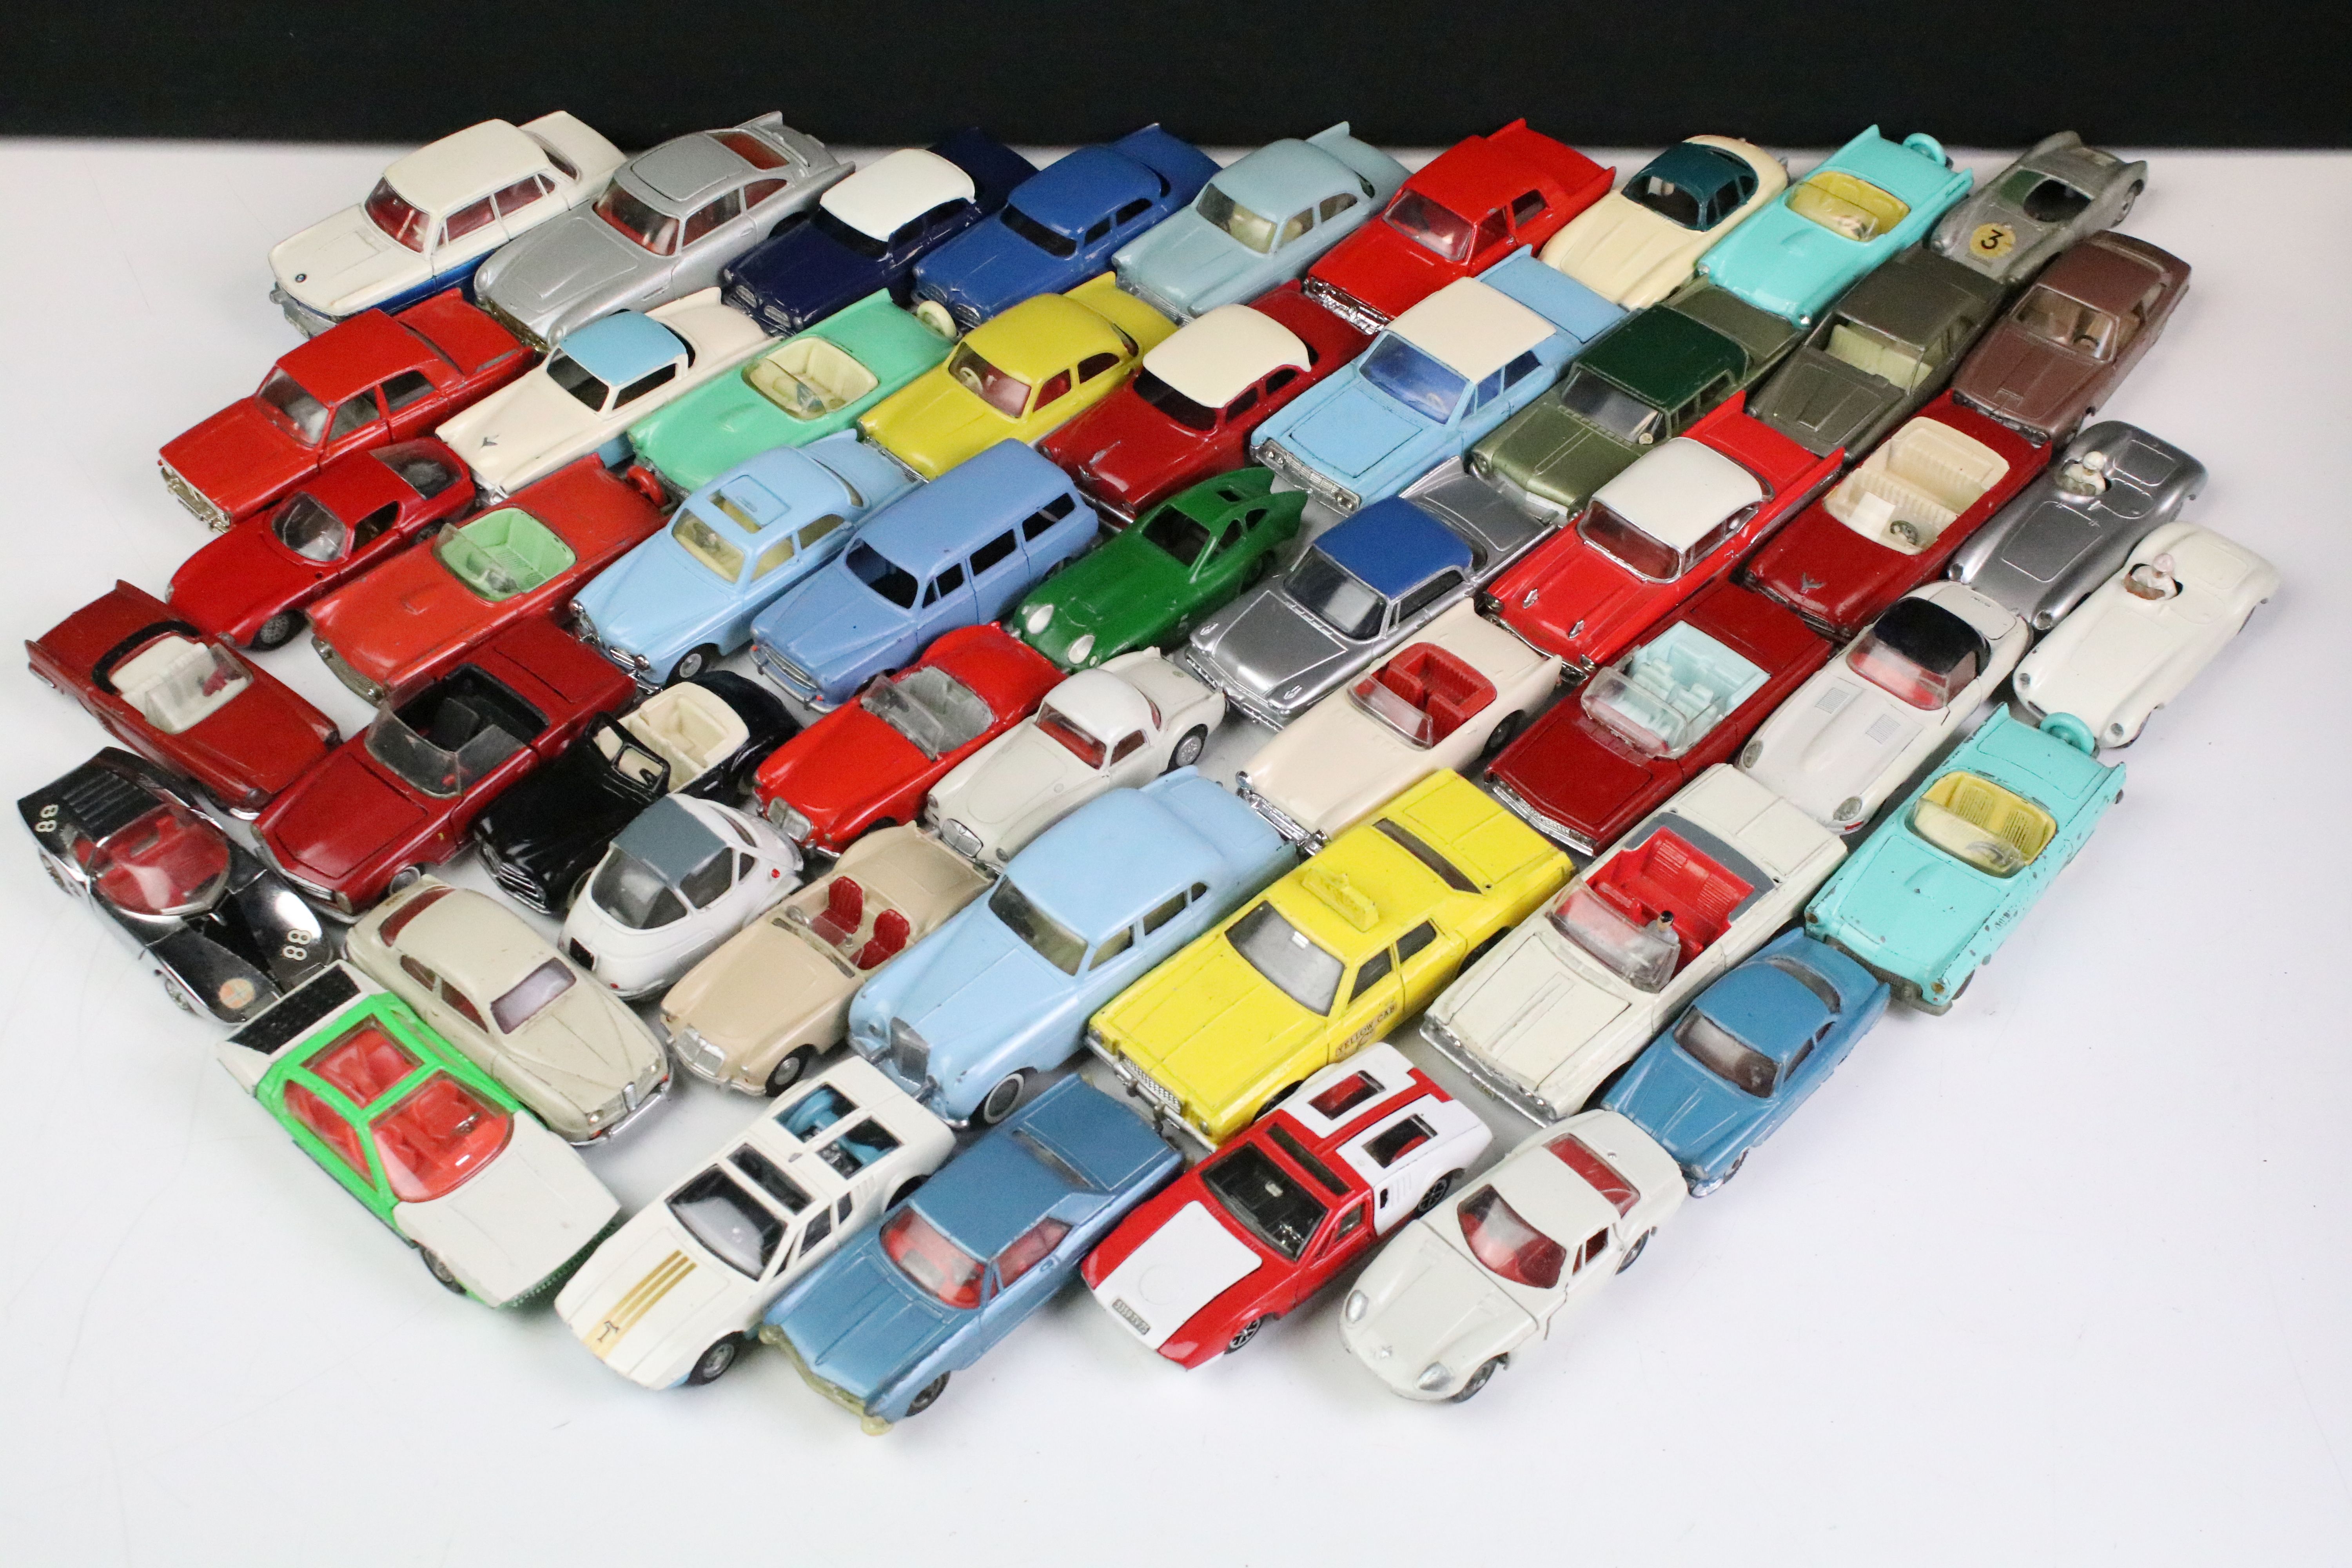 50 Mid 20th C onwards diecast models to include examples from Dinky, Corgi, Polistil, Tekno,